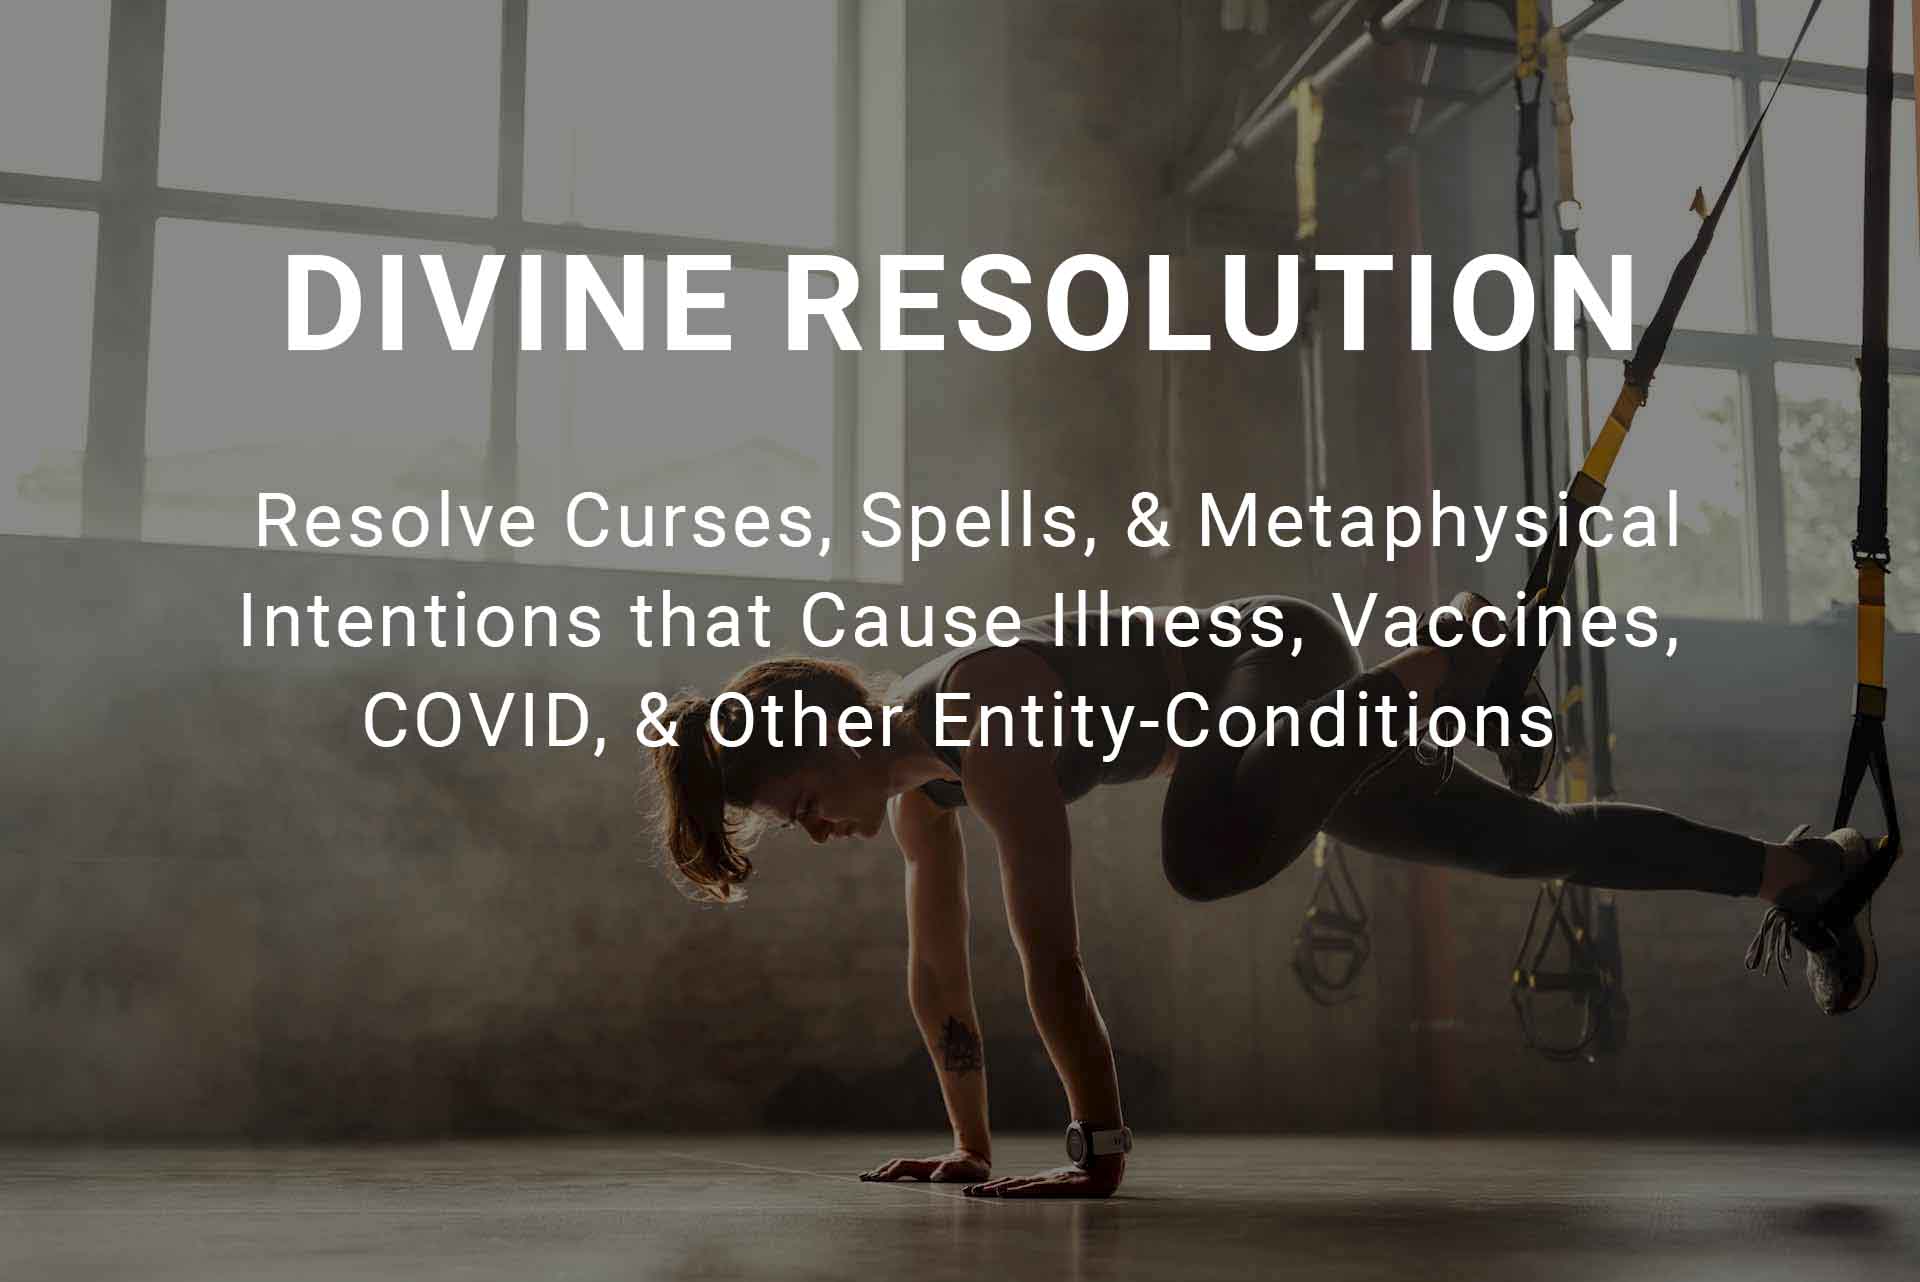 RESOLVE-CURSES-SPELLS-METAPHYSICAL-CONDITIONS-THAT-CAUSED-ILLNESS